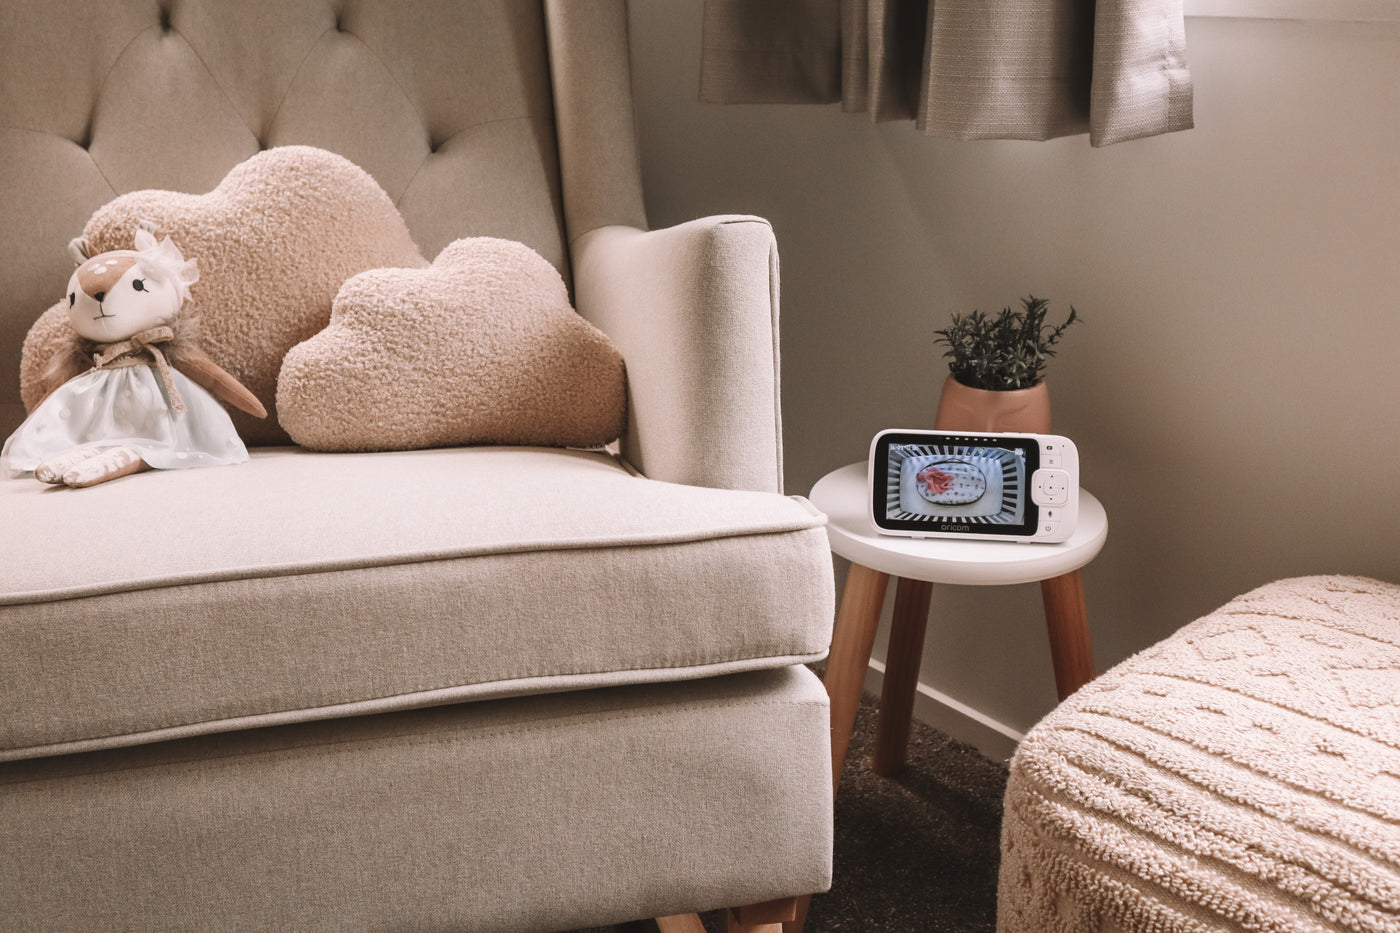 Oricom baby monitor in a lounge on a table